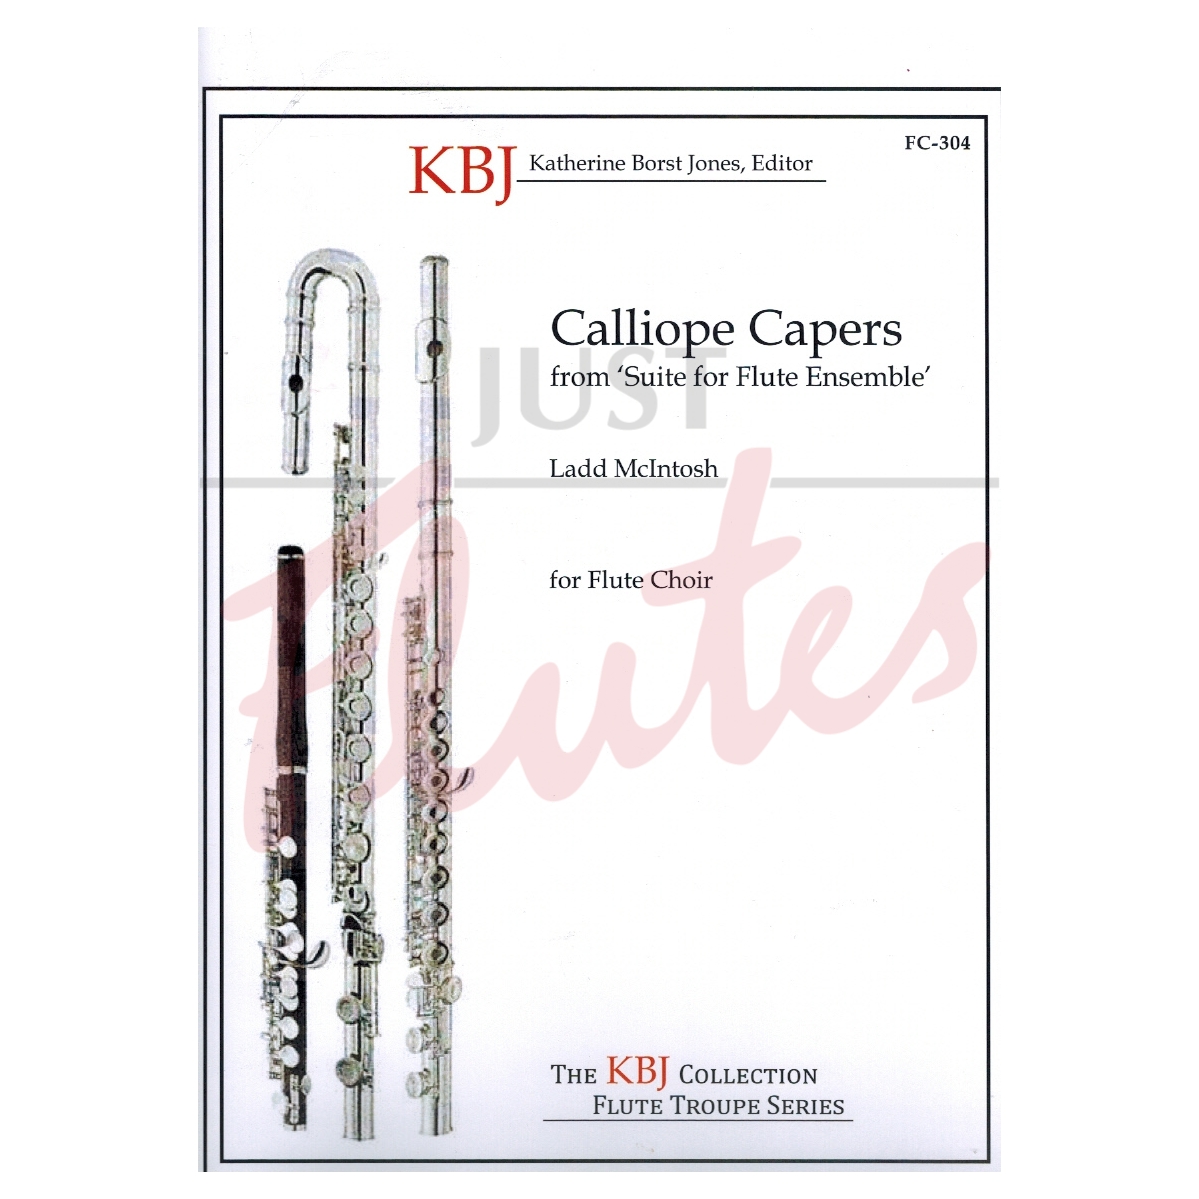 Calliope Capers from 'Suite for Flute Ensemble'